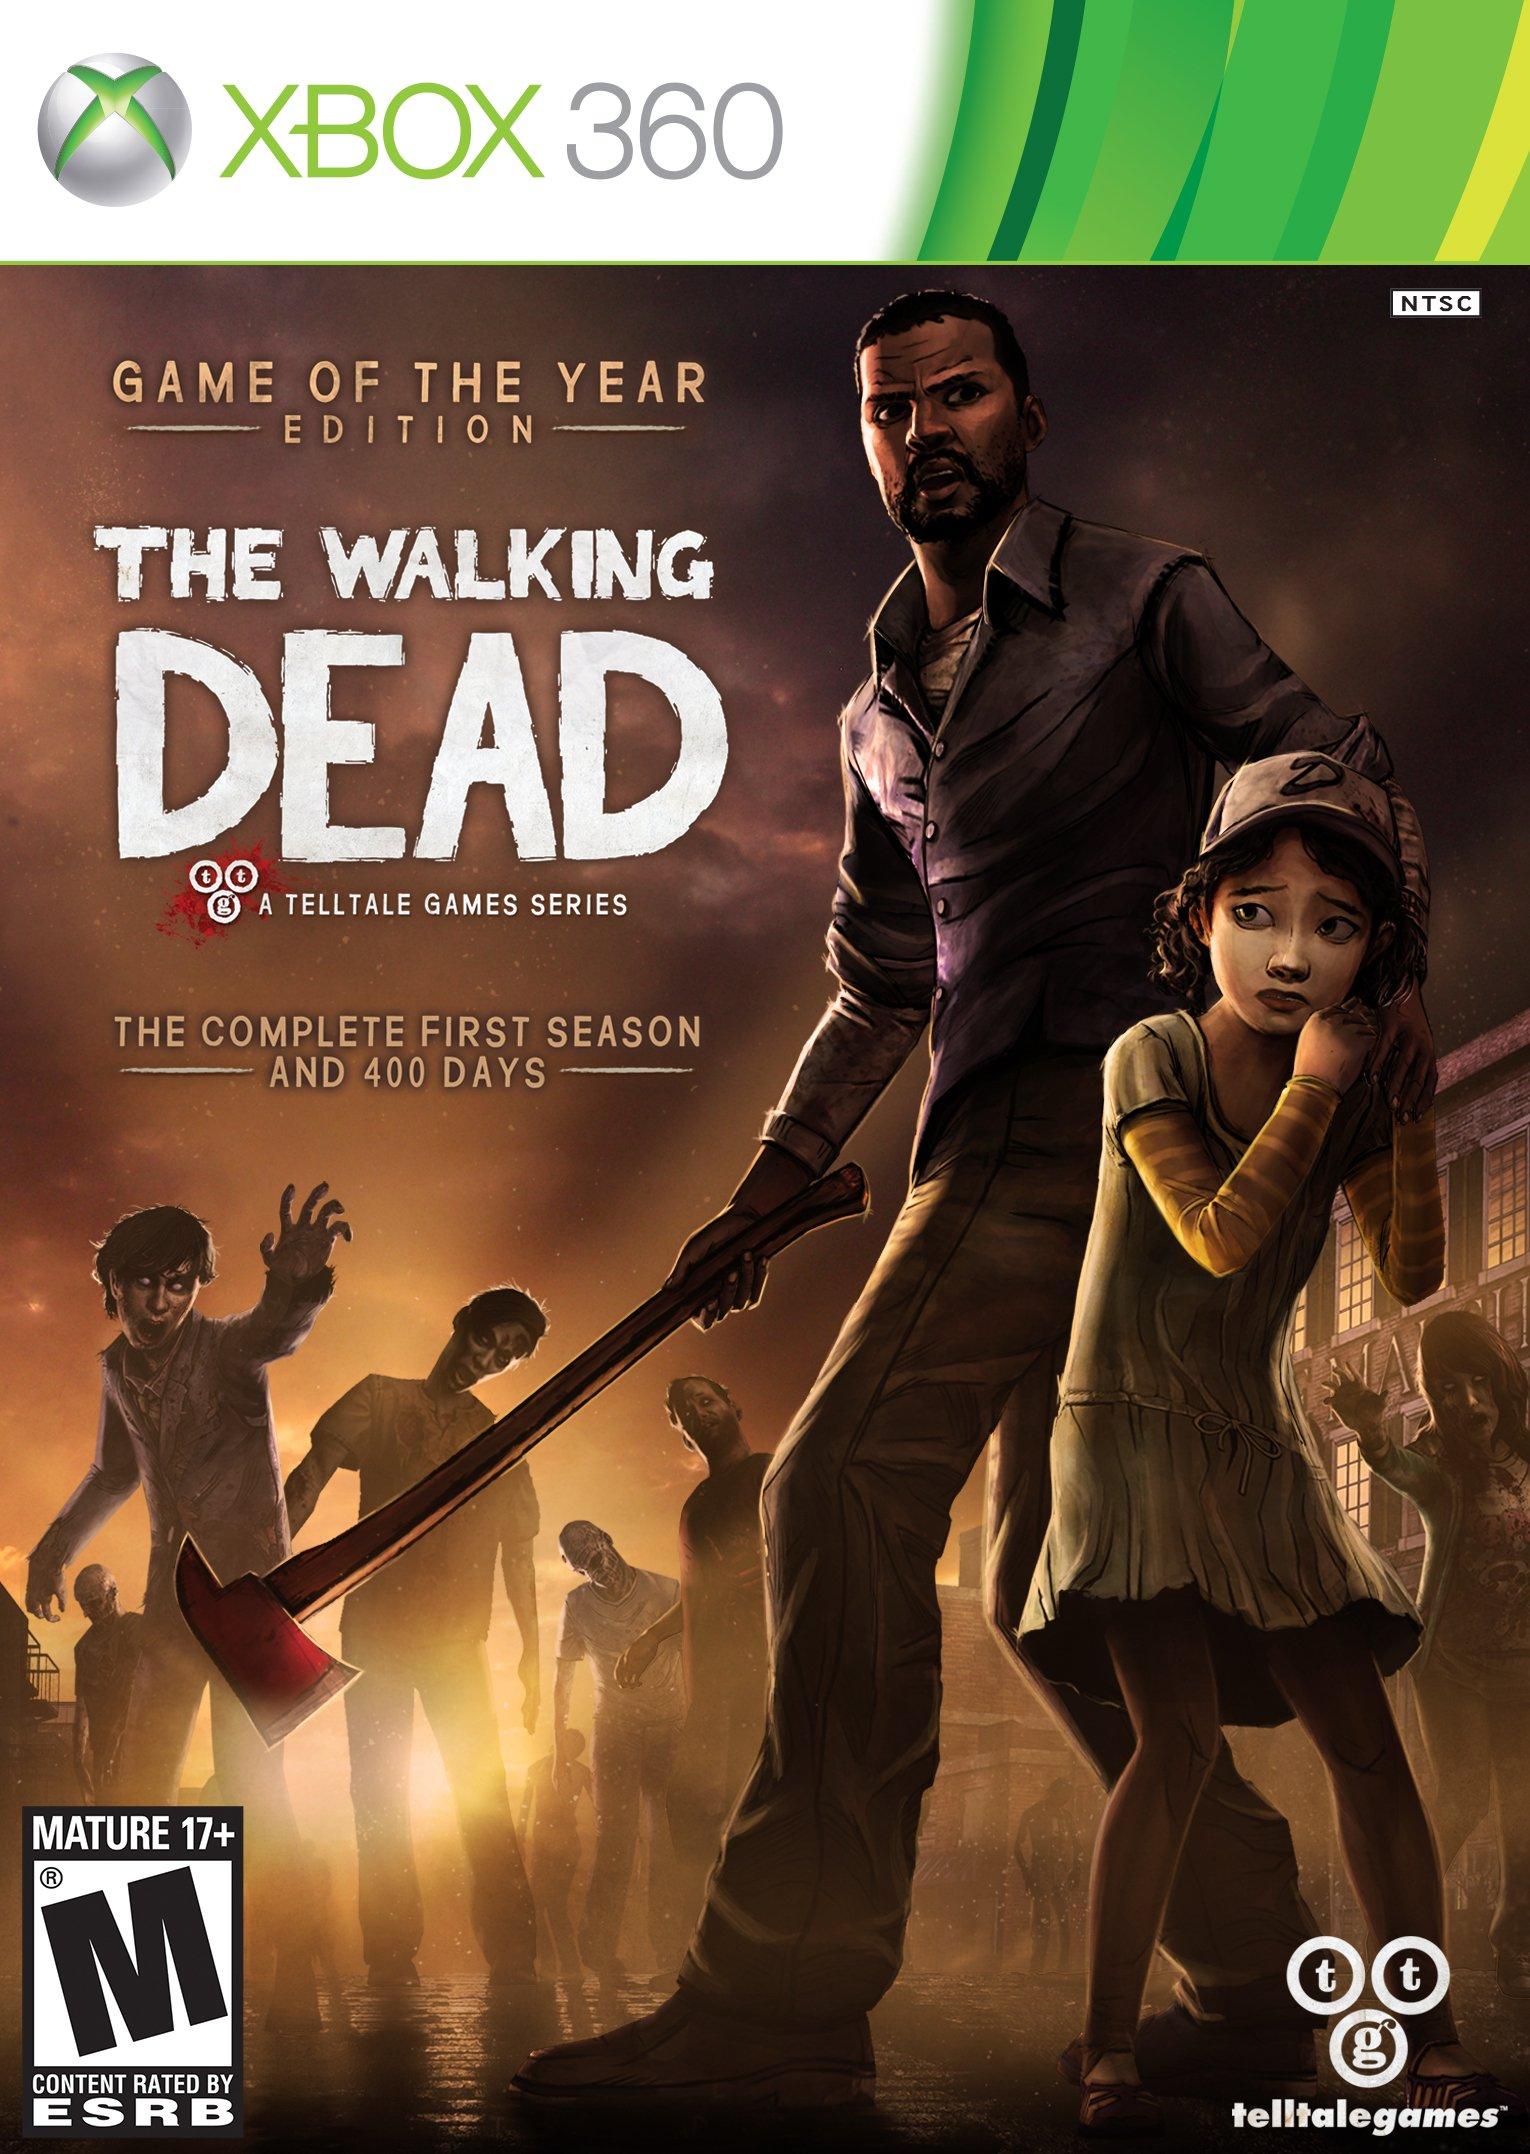 The Walking Dead Game of the Year Edition - Xbox 360